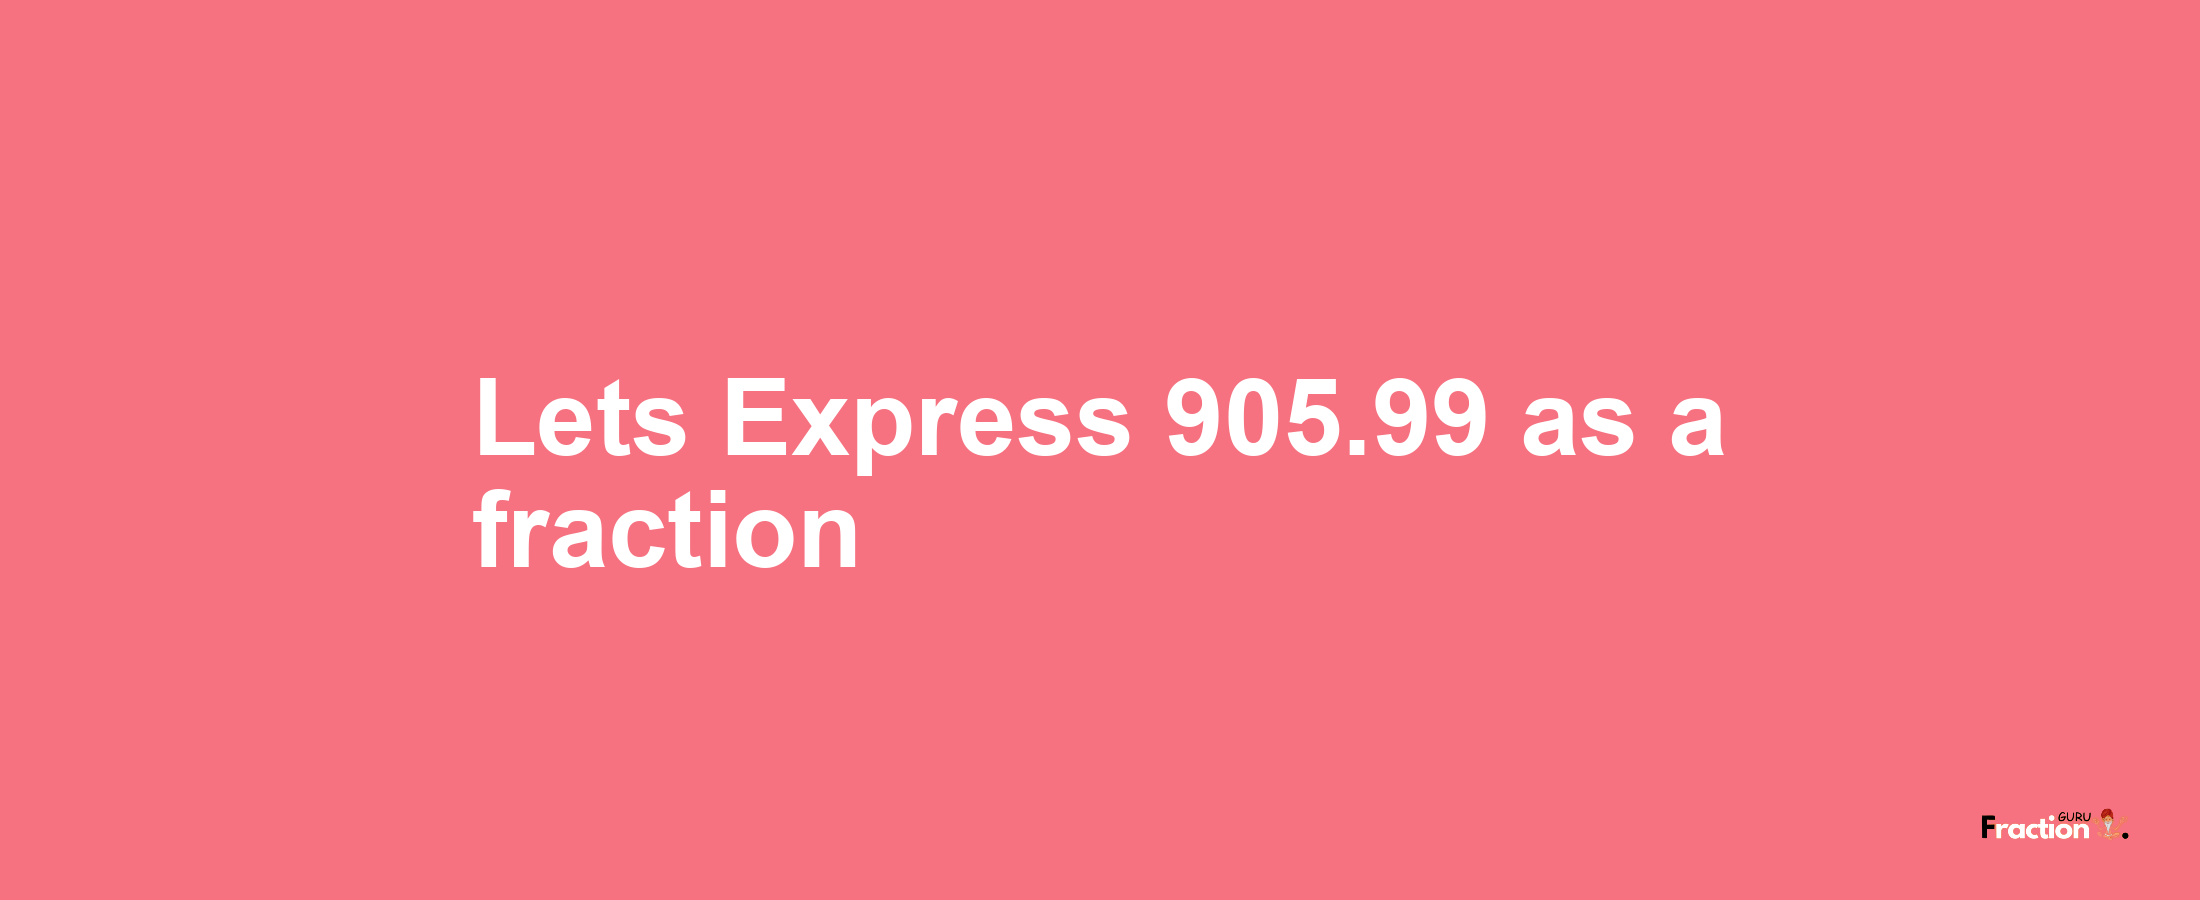 Lets Express 905.99 as afraction